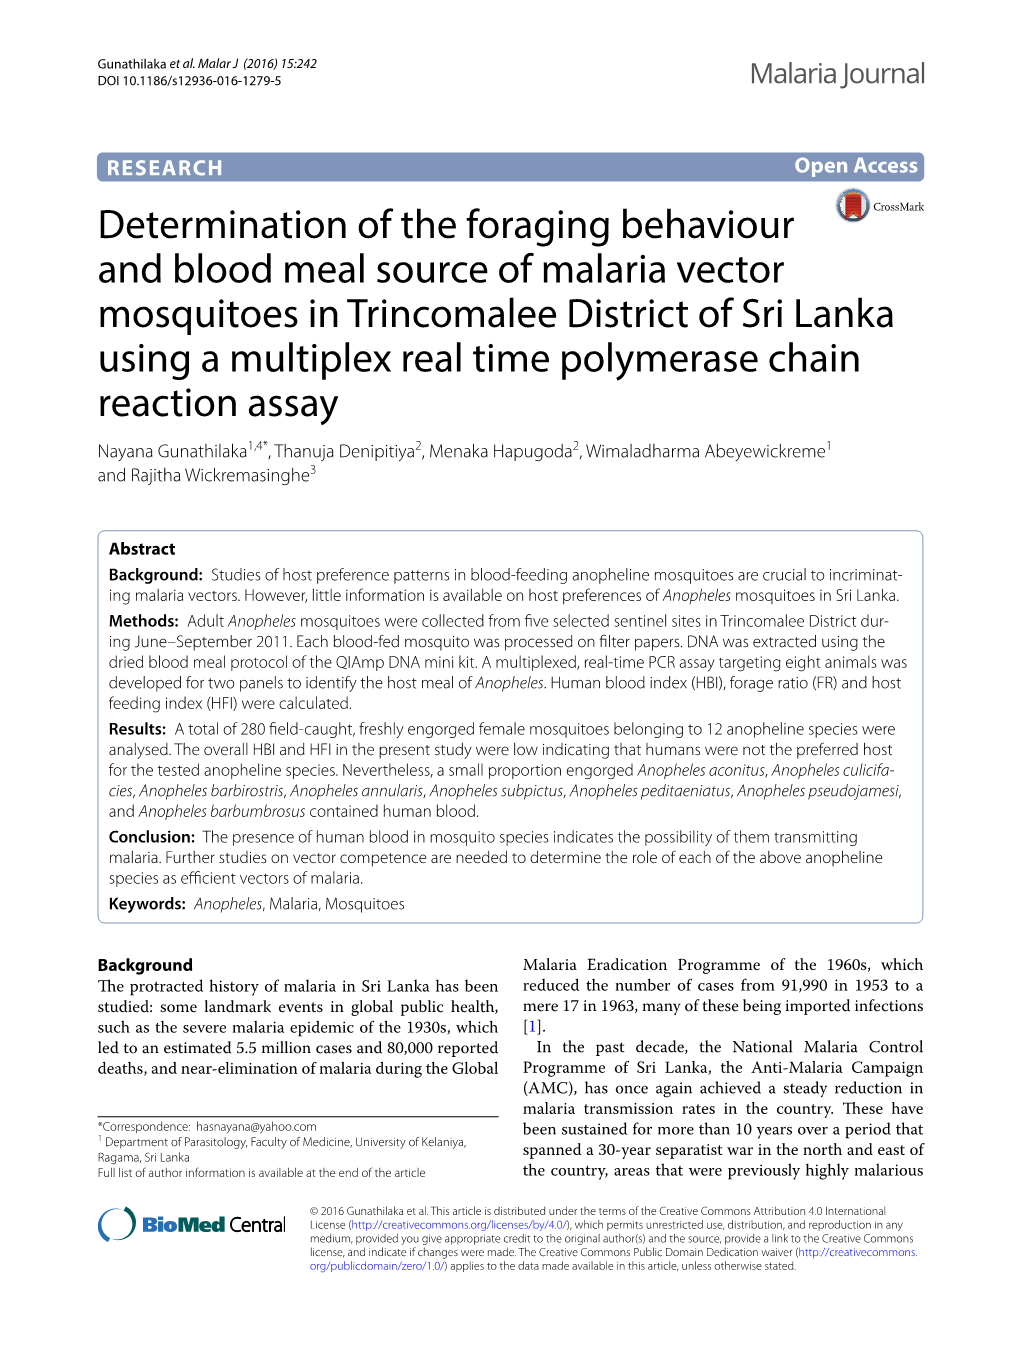 Determination of the Foraging Behaviour and Blood Meal Source